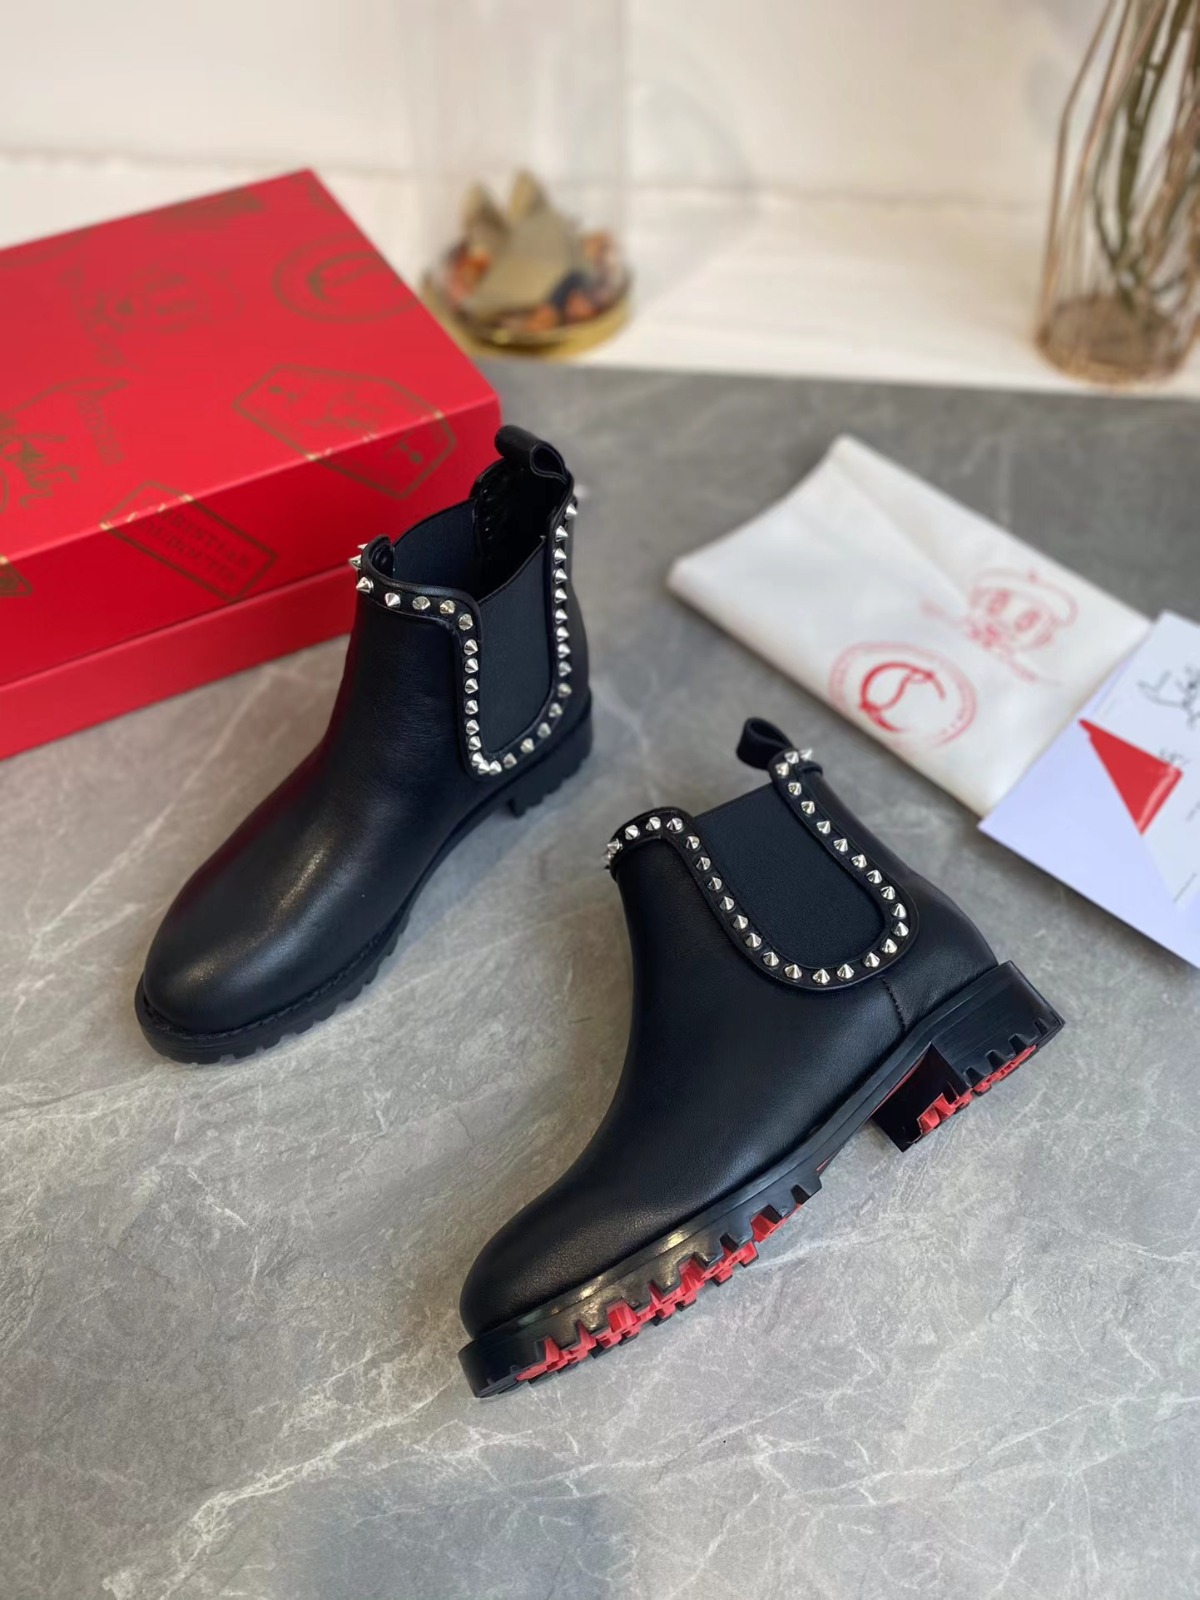 Christian Louboutin Spiked Ankle Boot - GlamGems Boutique